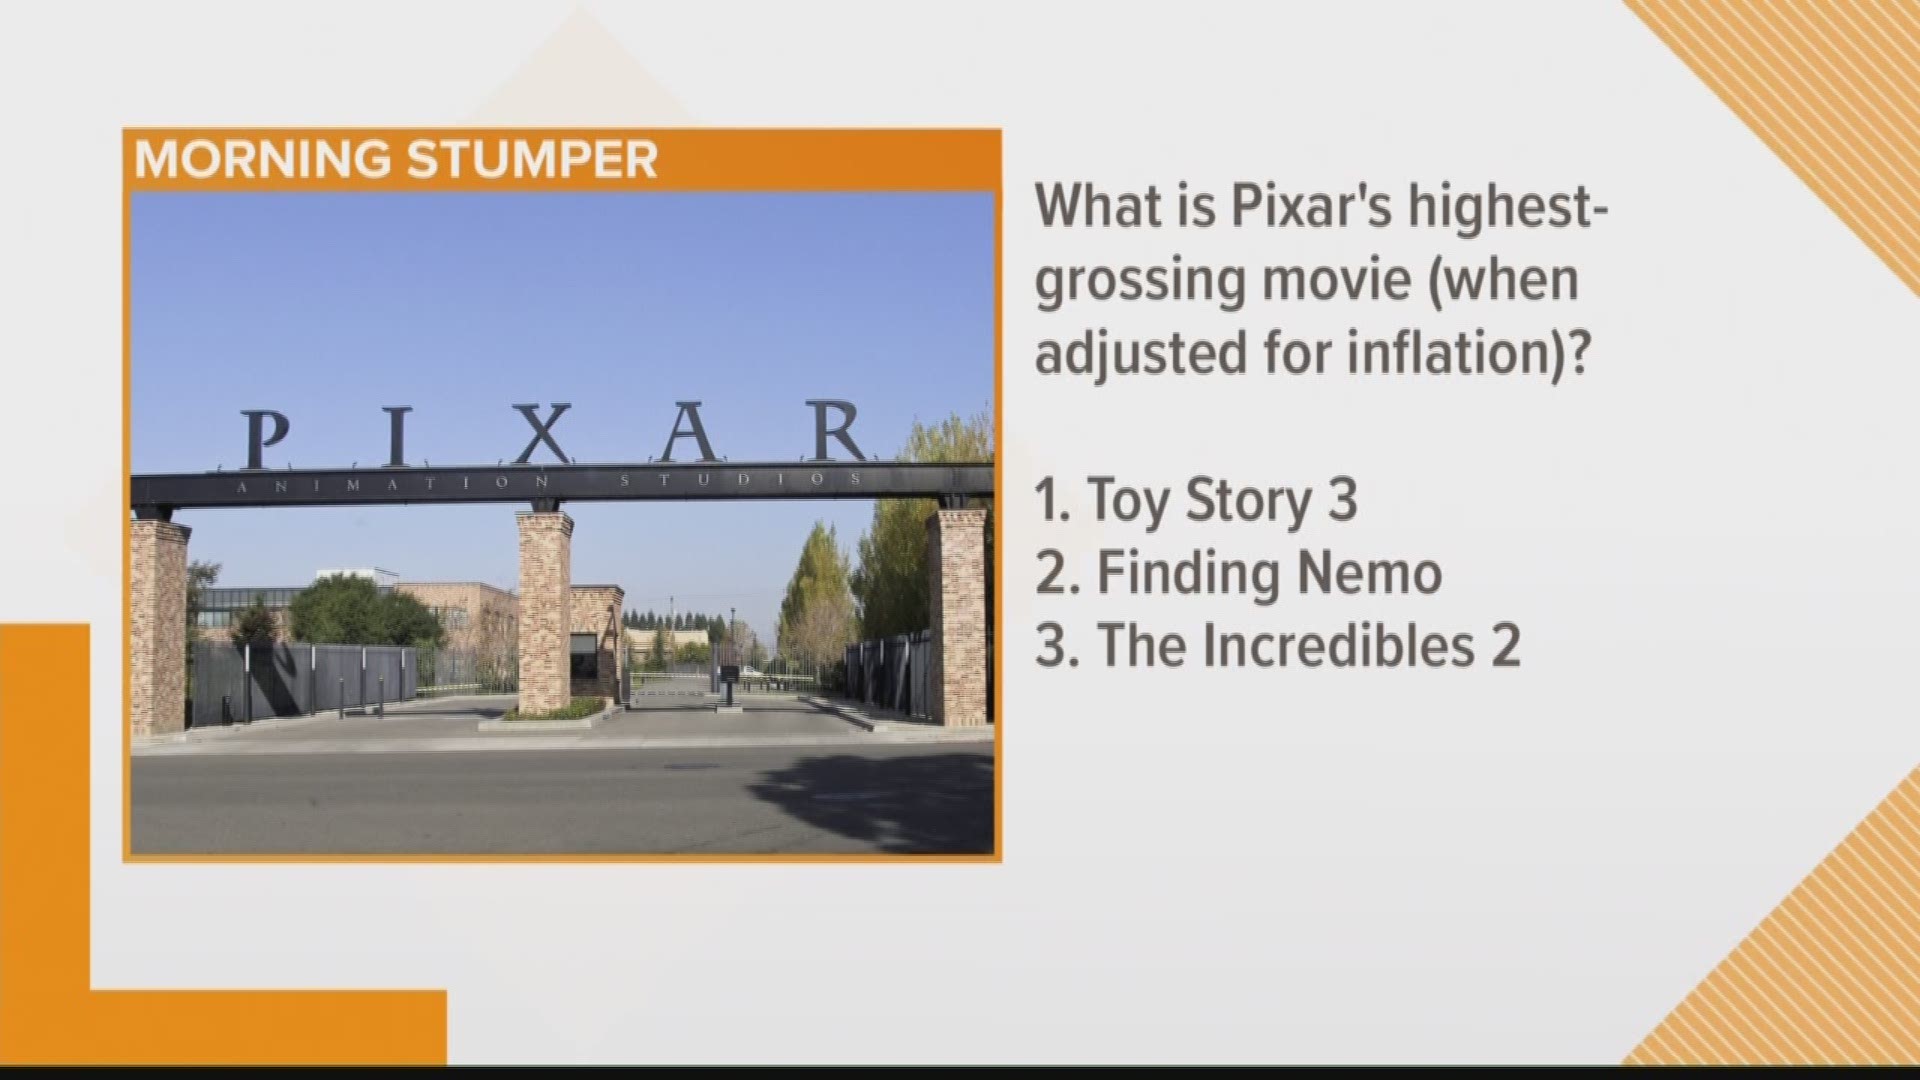 For today's stumper we asked. What is Pixar’s highest-grossing movie when adjusted for inflation?